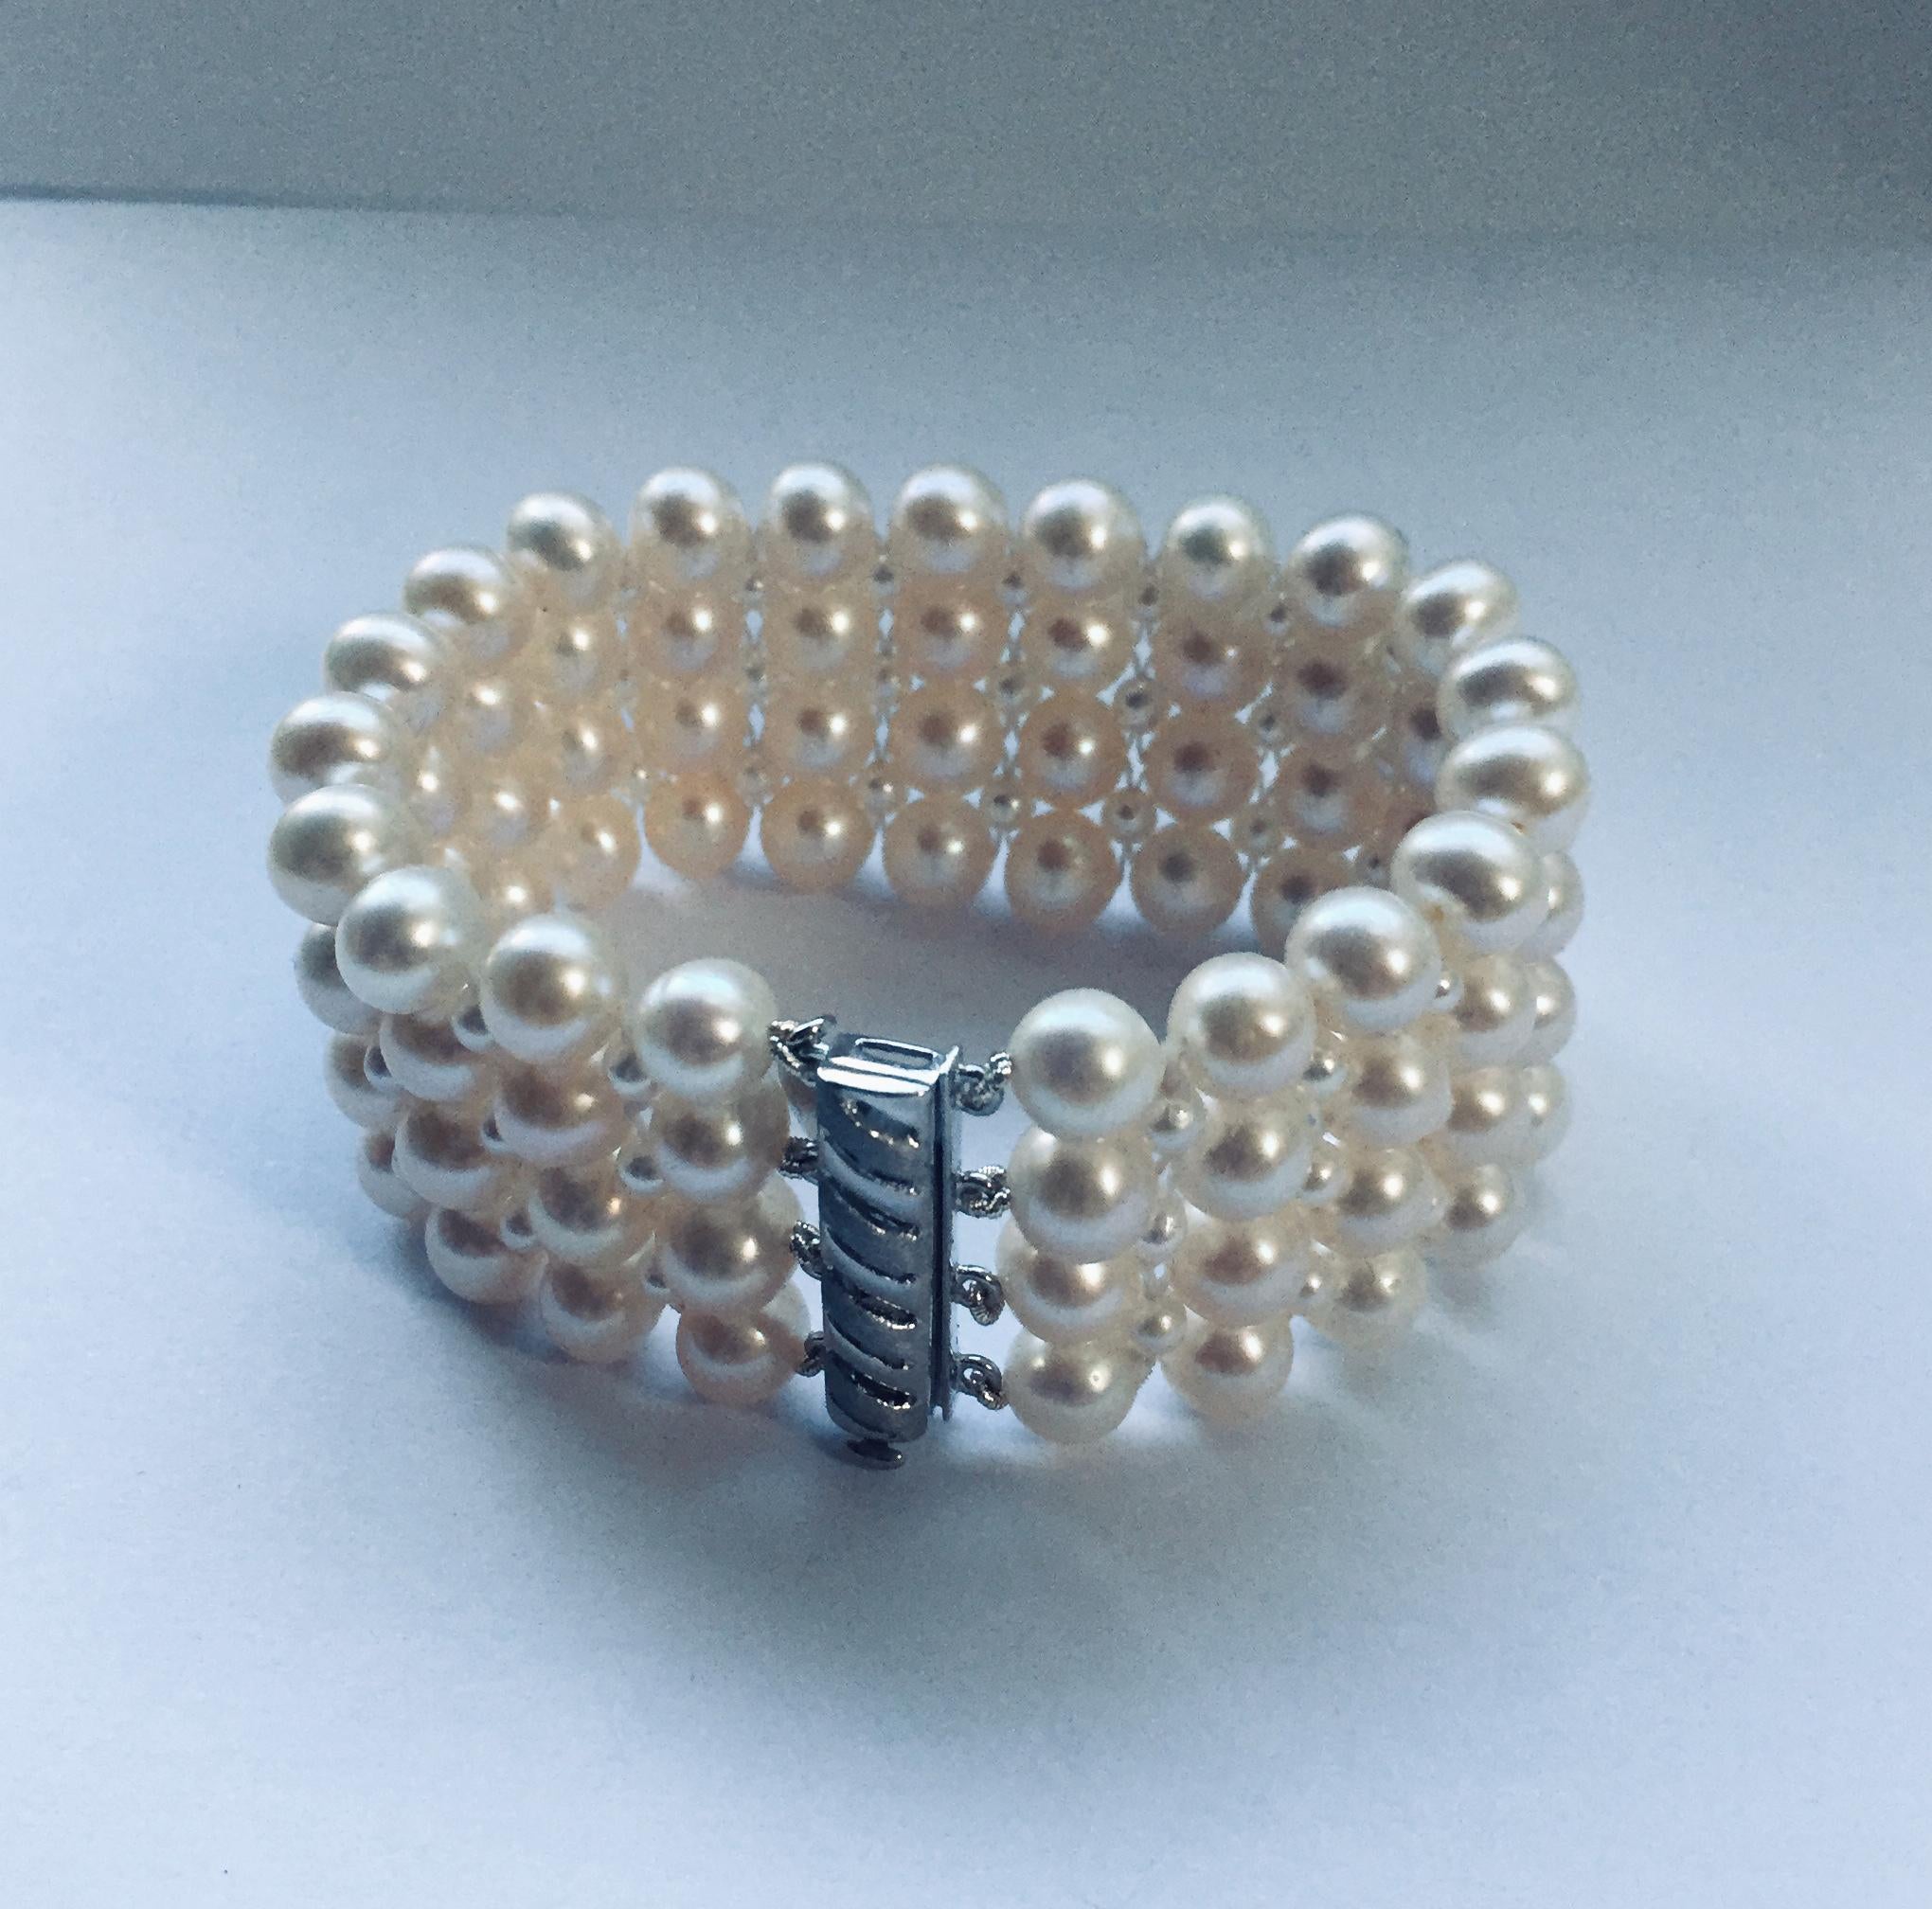 Marina J. Hand-Woven Pearl Bracelet with 14 Karat White Gold Plated Clasp 6